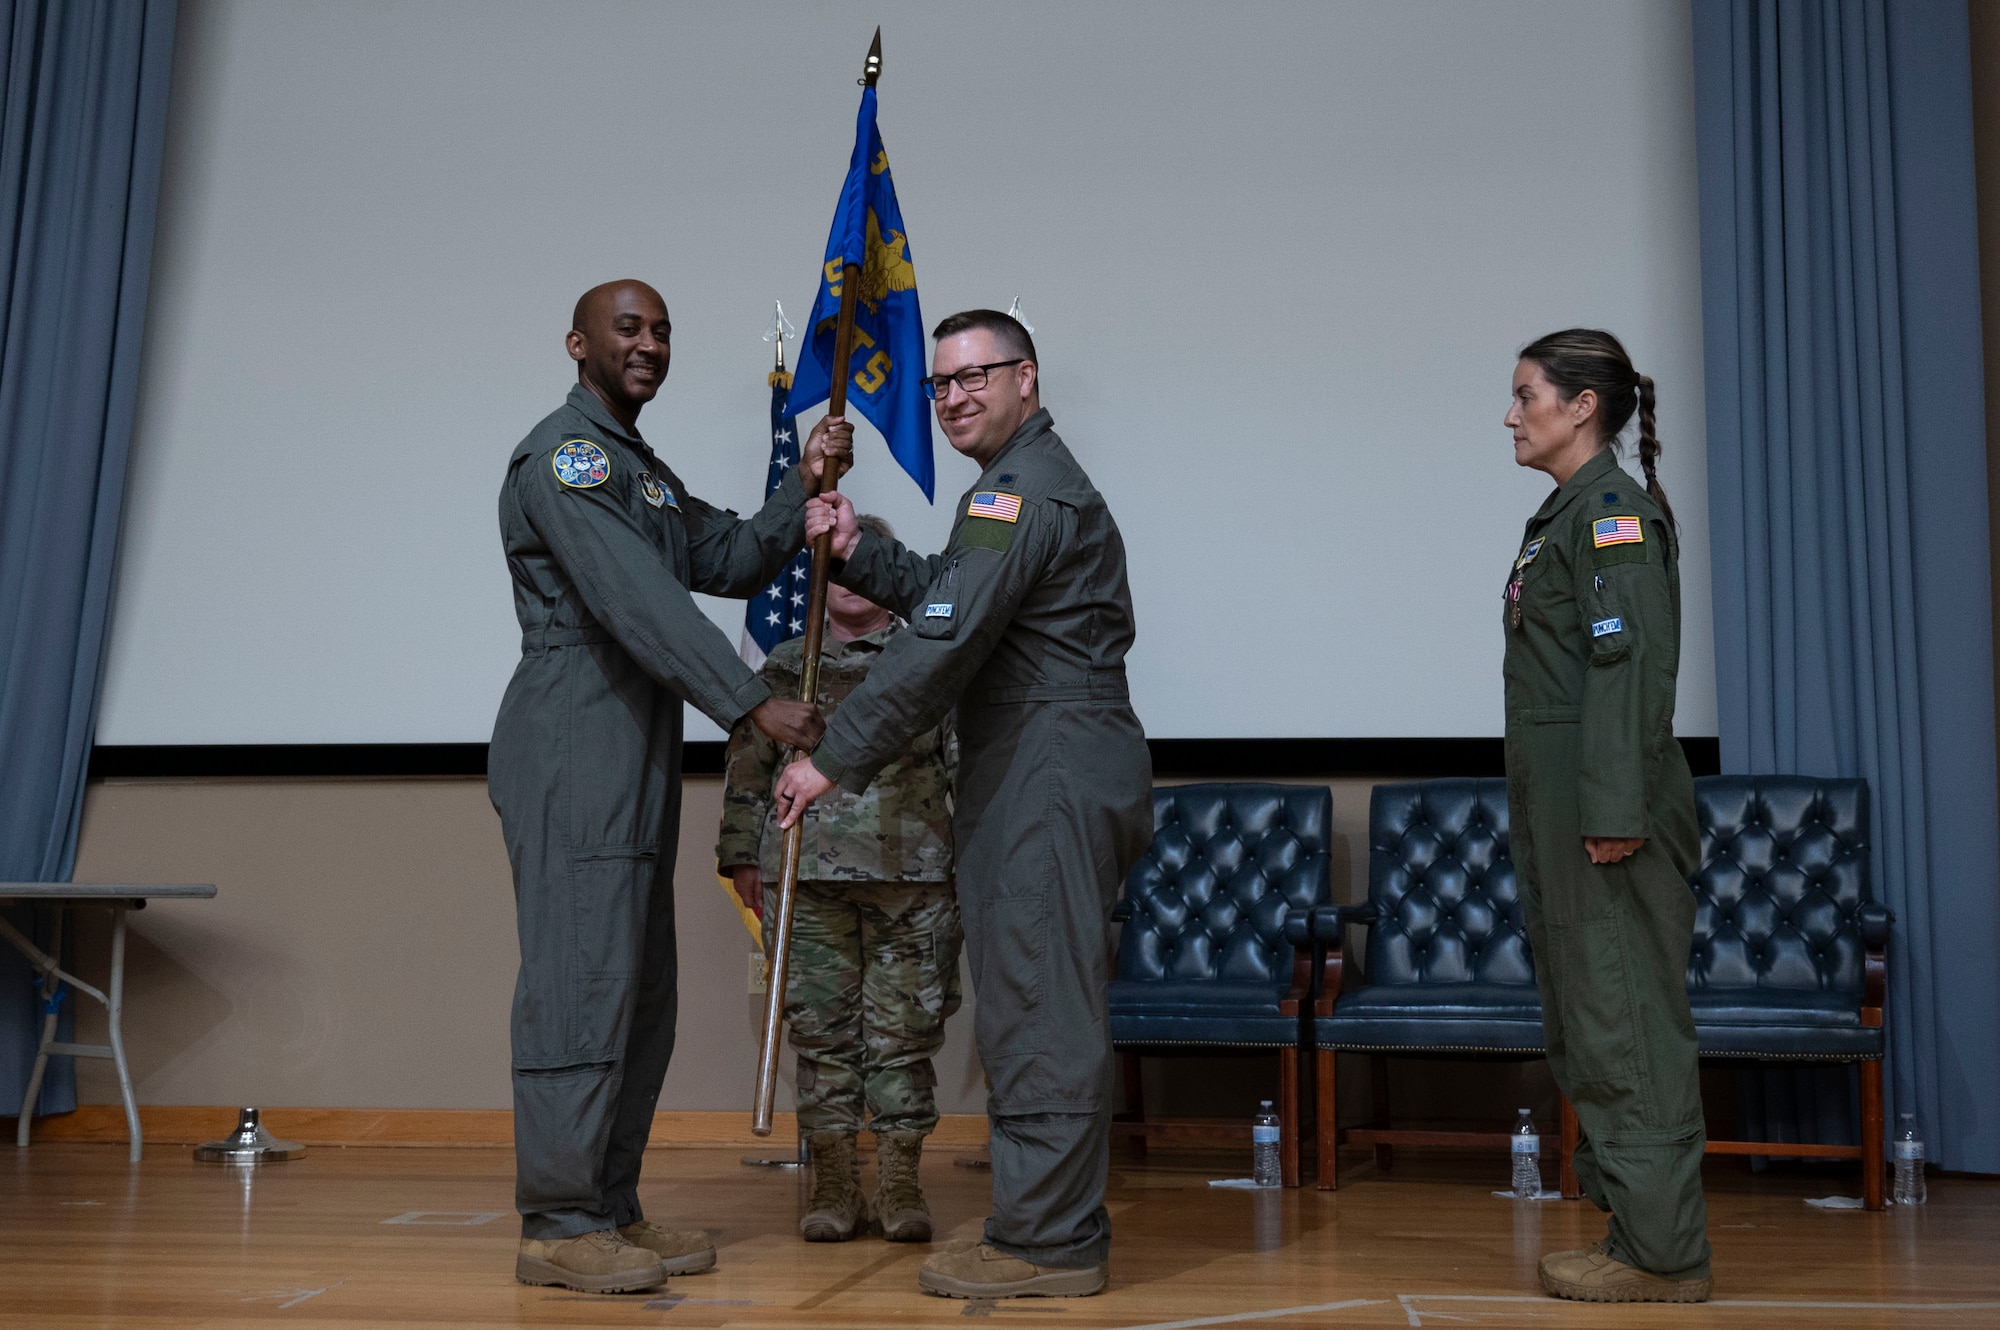 U.S. Air Force Lt. Col. Andrew Calhoun, current 96th Flying Training Squadron commander, accepts the 96th FTS guidon from Col. Michael McMillan, 340th Flying Training Group director of operations, during the 96th FTS change of command ceremony at Laughlin Air Force Base, Texas, May 10, 2024. The passing of the guidon to Calhoun signifies the acceptance of command of the 96th FTW. (U.S. Air Force photo by Senior Airman Kailee Reynolds)